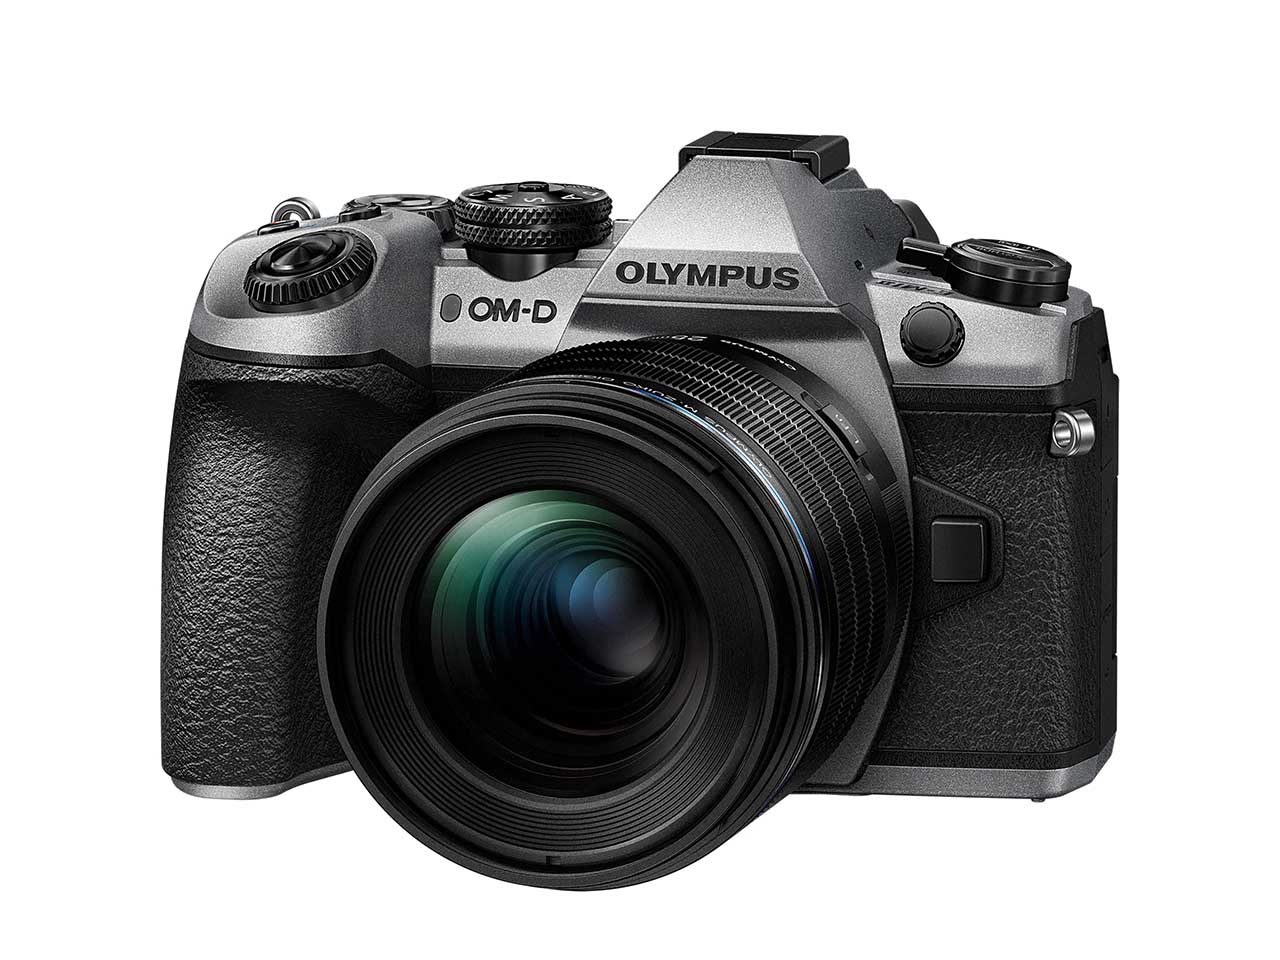 Olympus OM-D E-M1 Mark II Silver edition launched for company's 